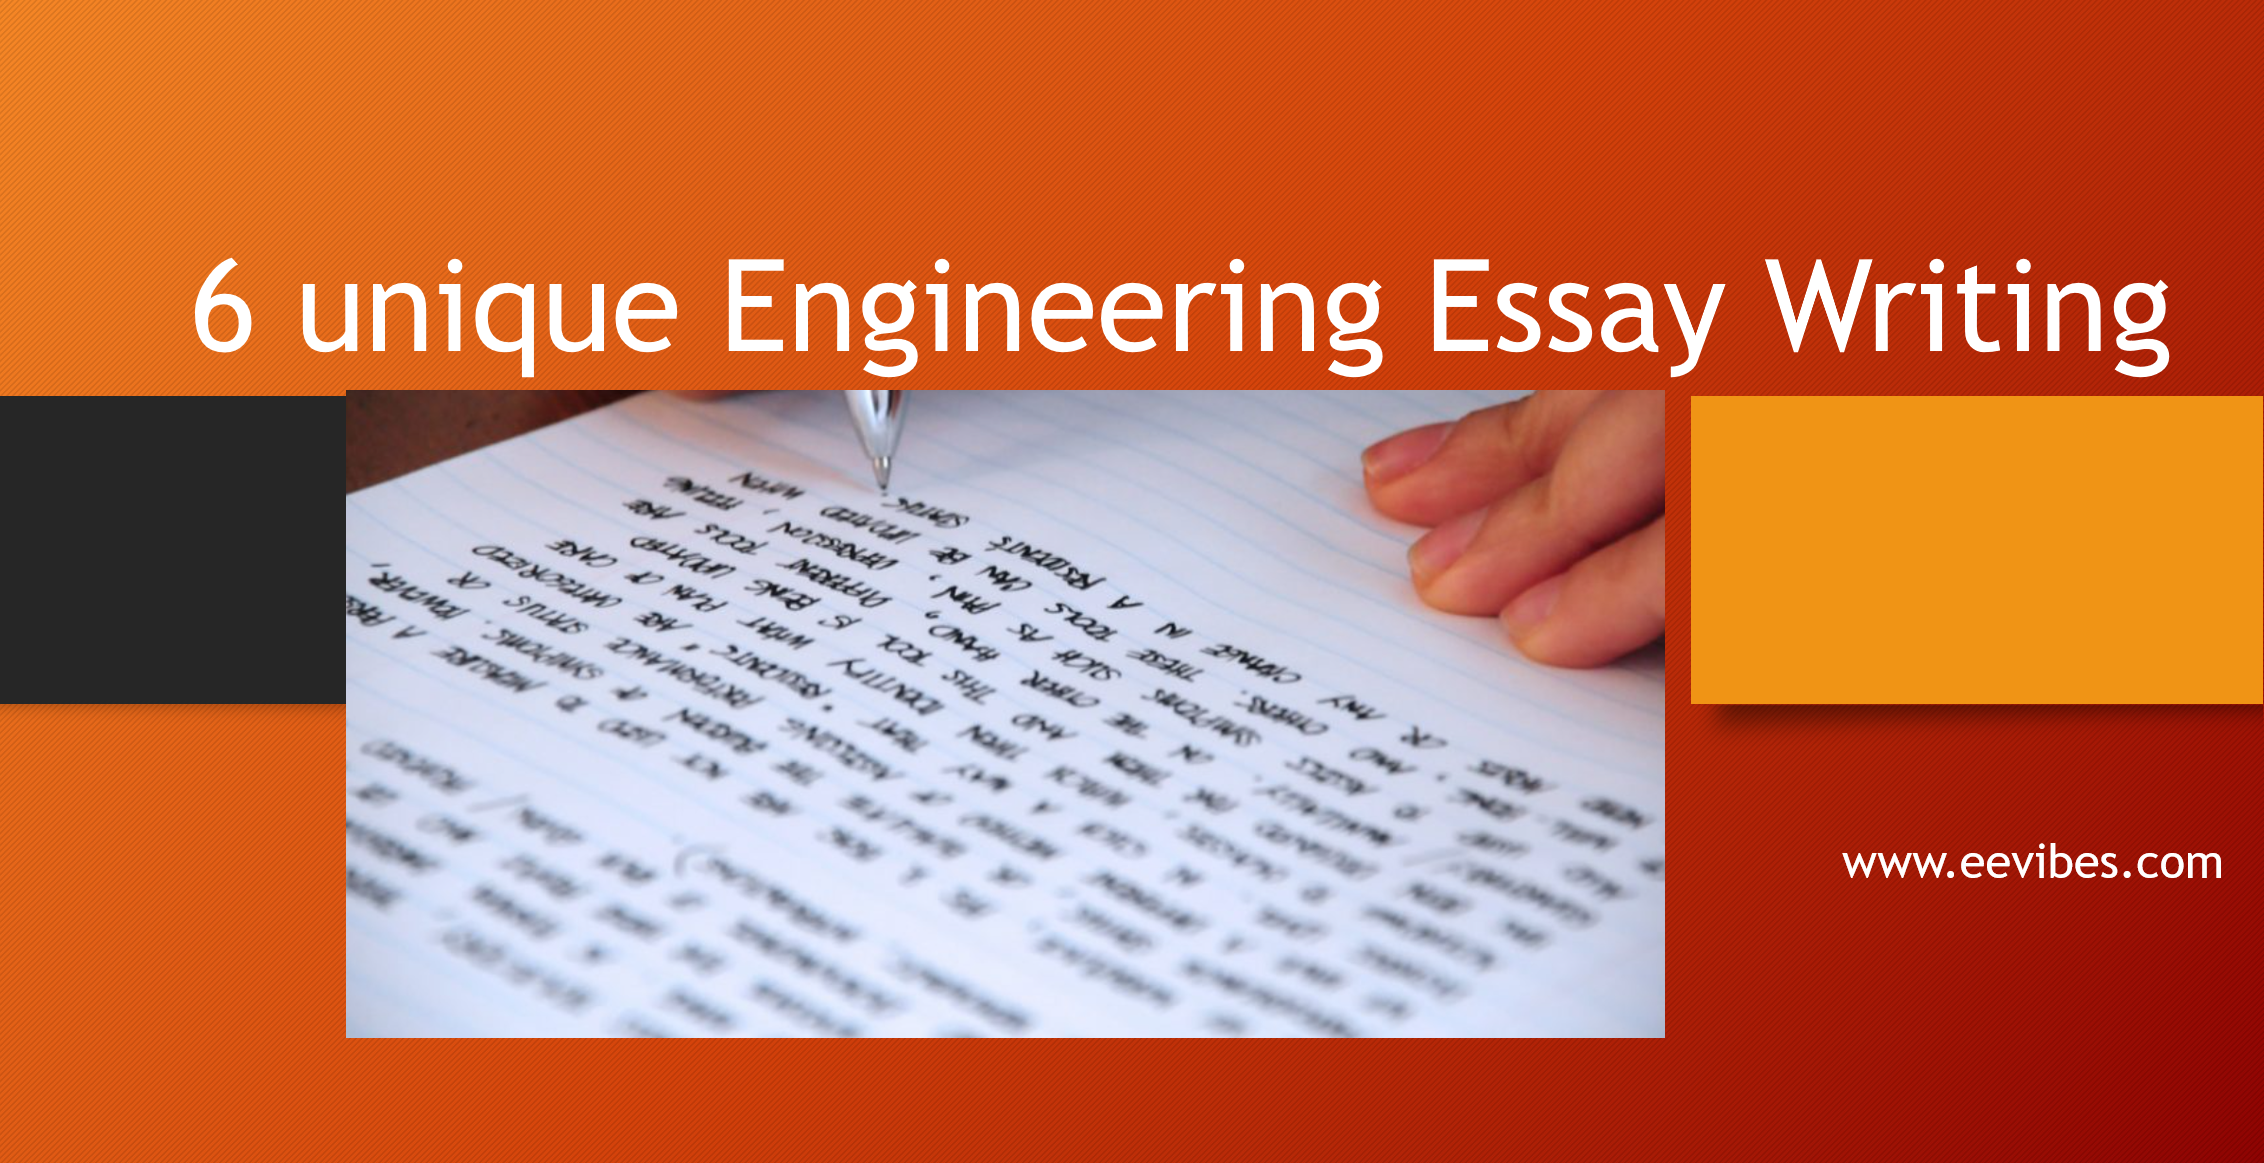 Six Unique Tips for Writing a Brilliant Engineering Essay